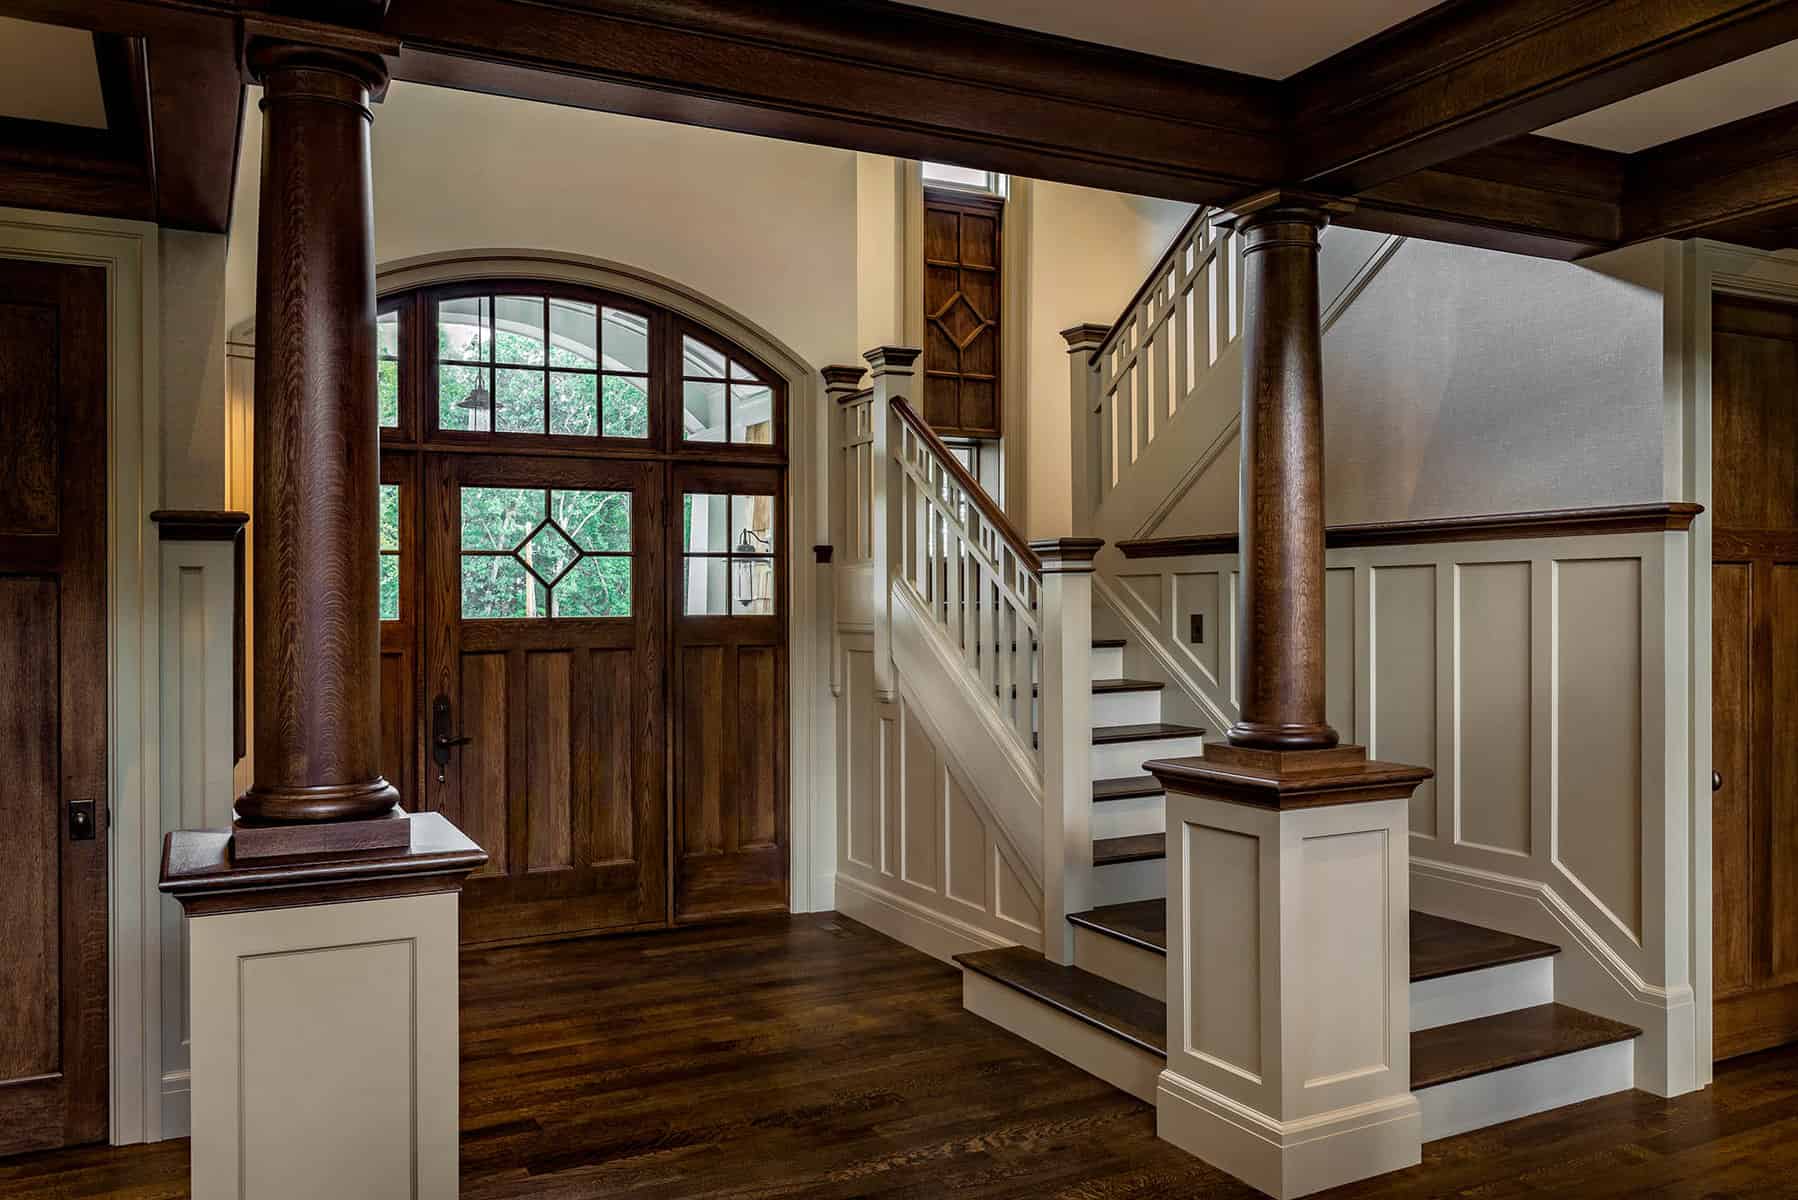 Front Entry Interior-- white oak columns and coffered ceilings. Tall panel on stair window echoes door style